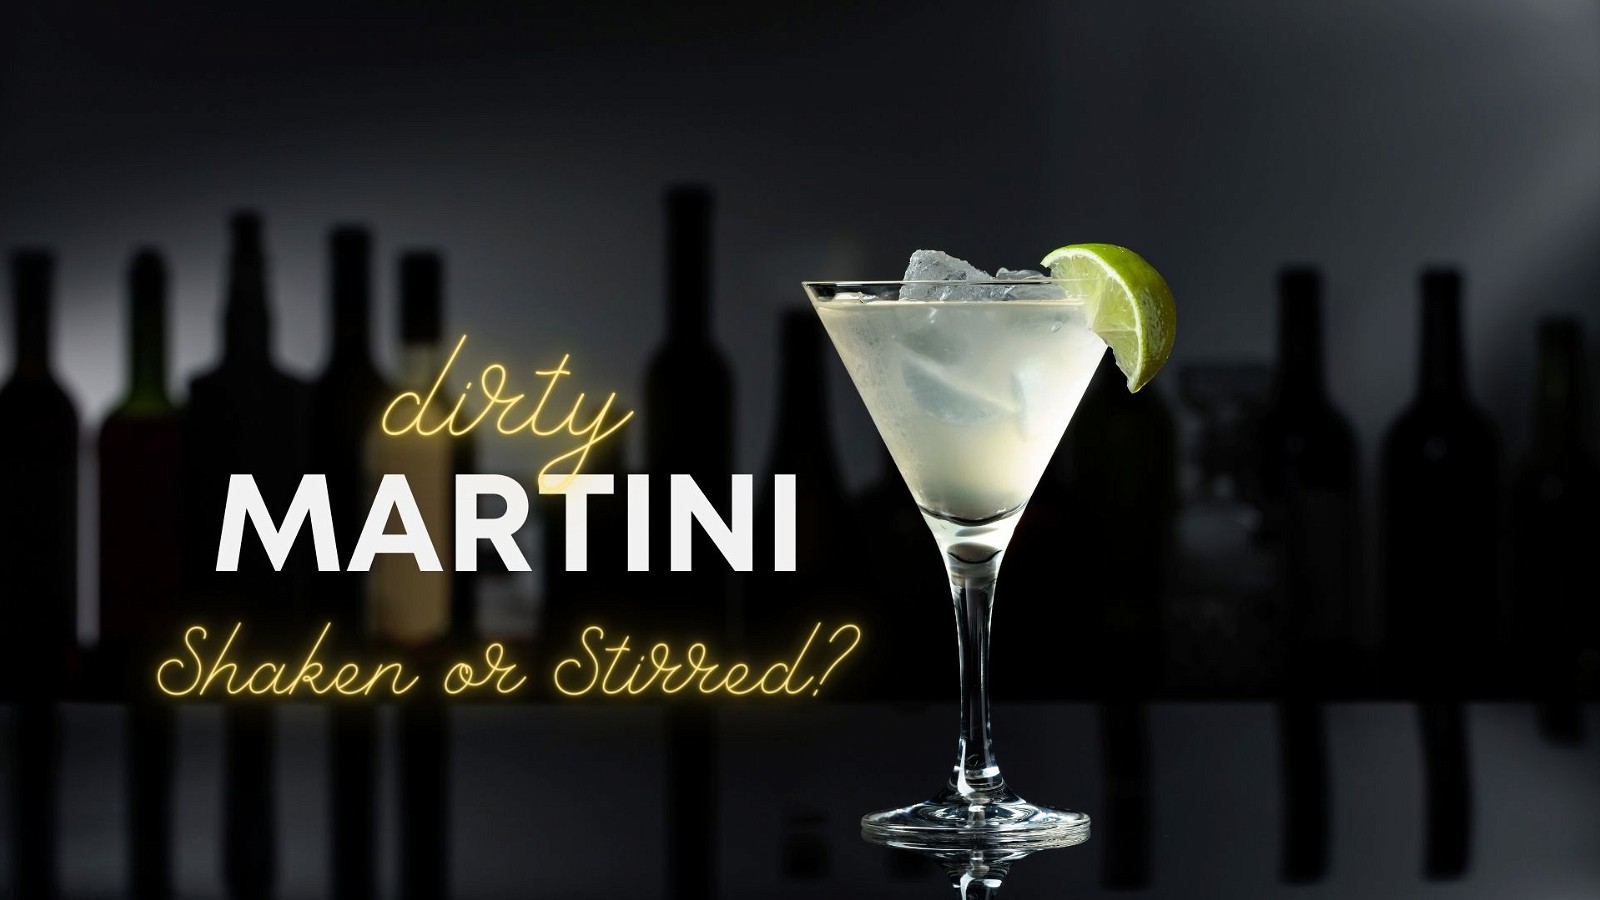 Image of The Dirty Martini